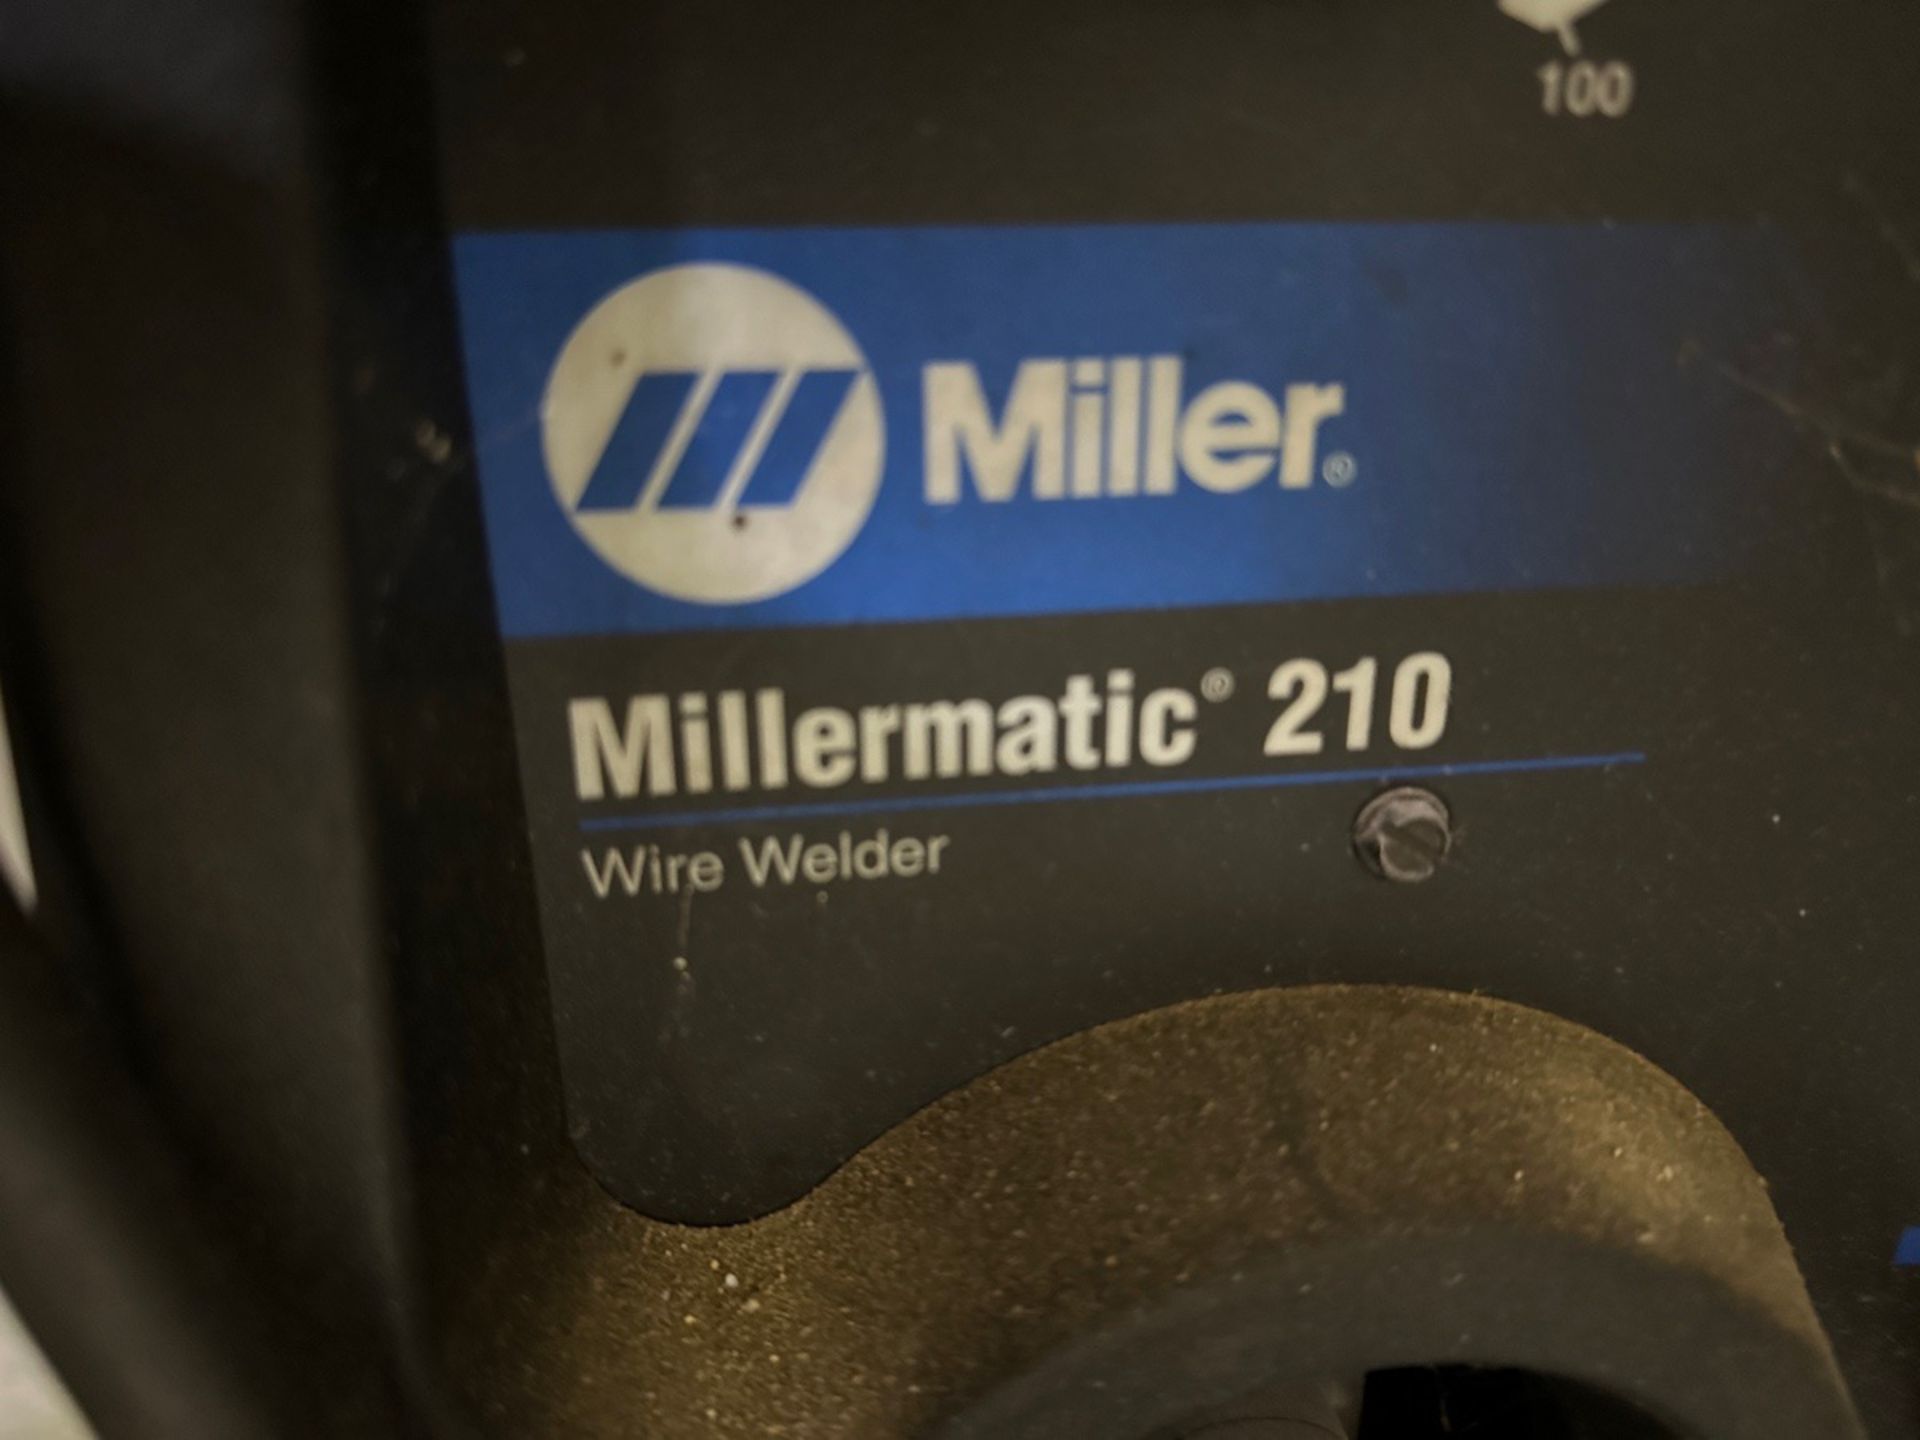 Lot of Millermatic 210 Wire Welder with Welding Cart, Hoses and Screen | Rig Fee $50 - Image 2 of 4